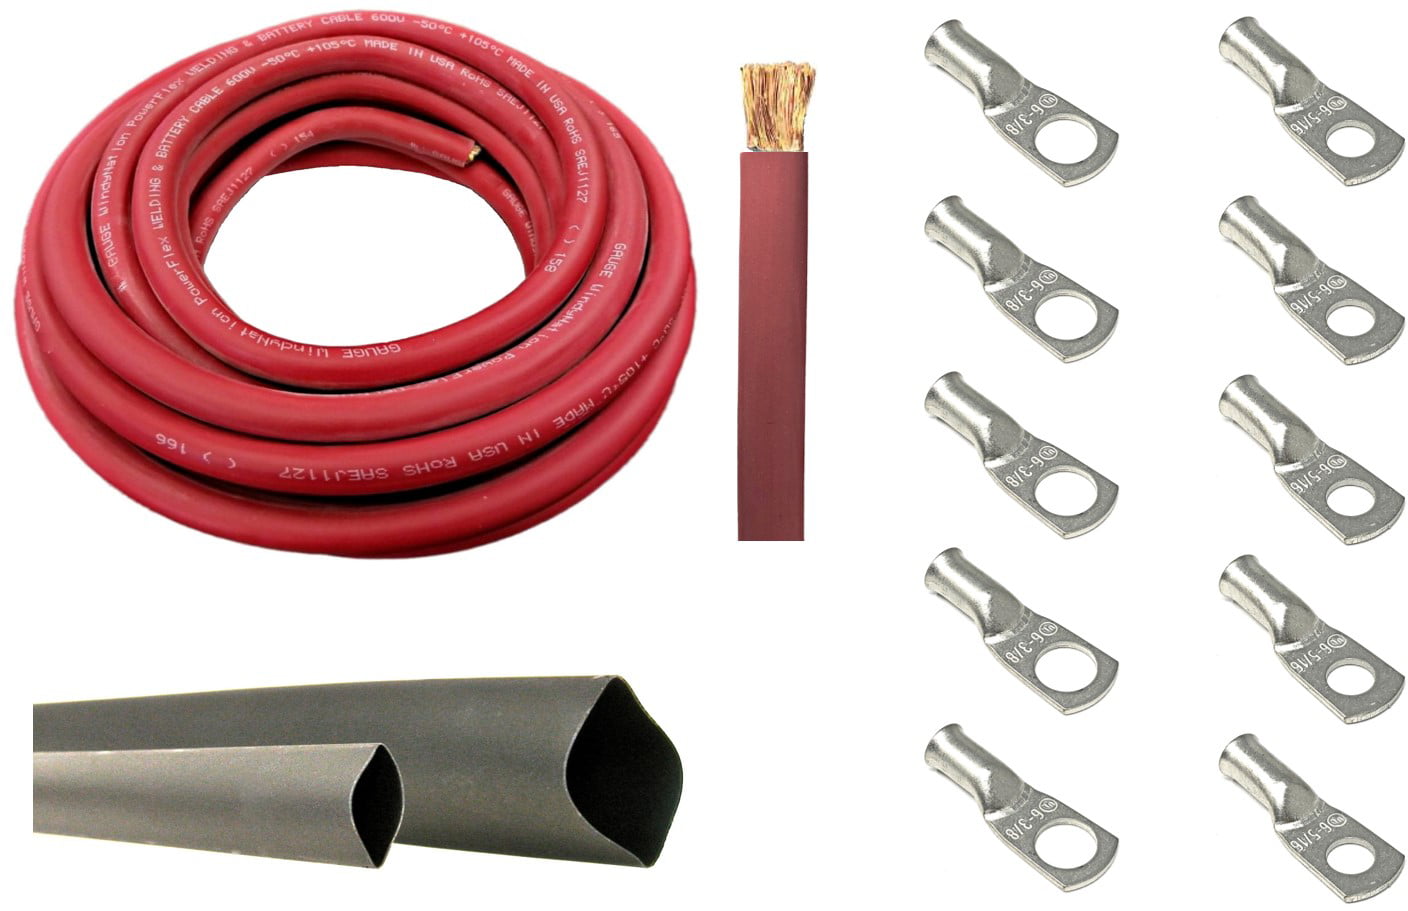 10 Feet Black Welding Battery Pure Copper Flexible Cable 3 Feet Black Heat Shrink Tubing 10pcs of 3/8 Tinned Copper Cable Lug Terminal Connectors 6 Gauge 6 AWG 10 Feet Red 